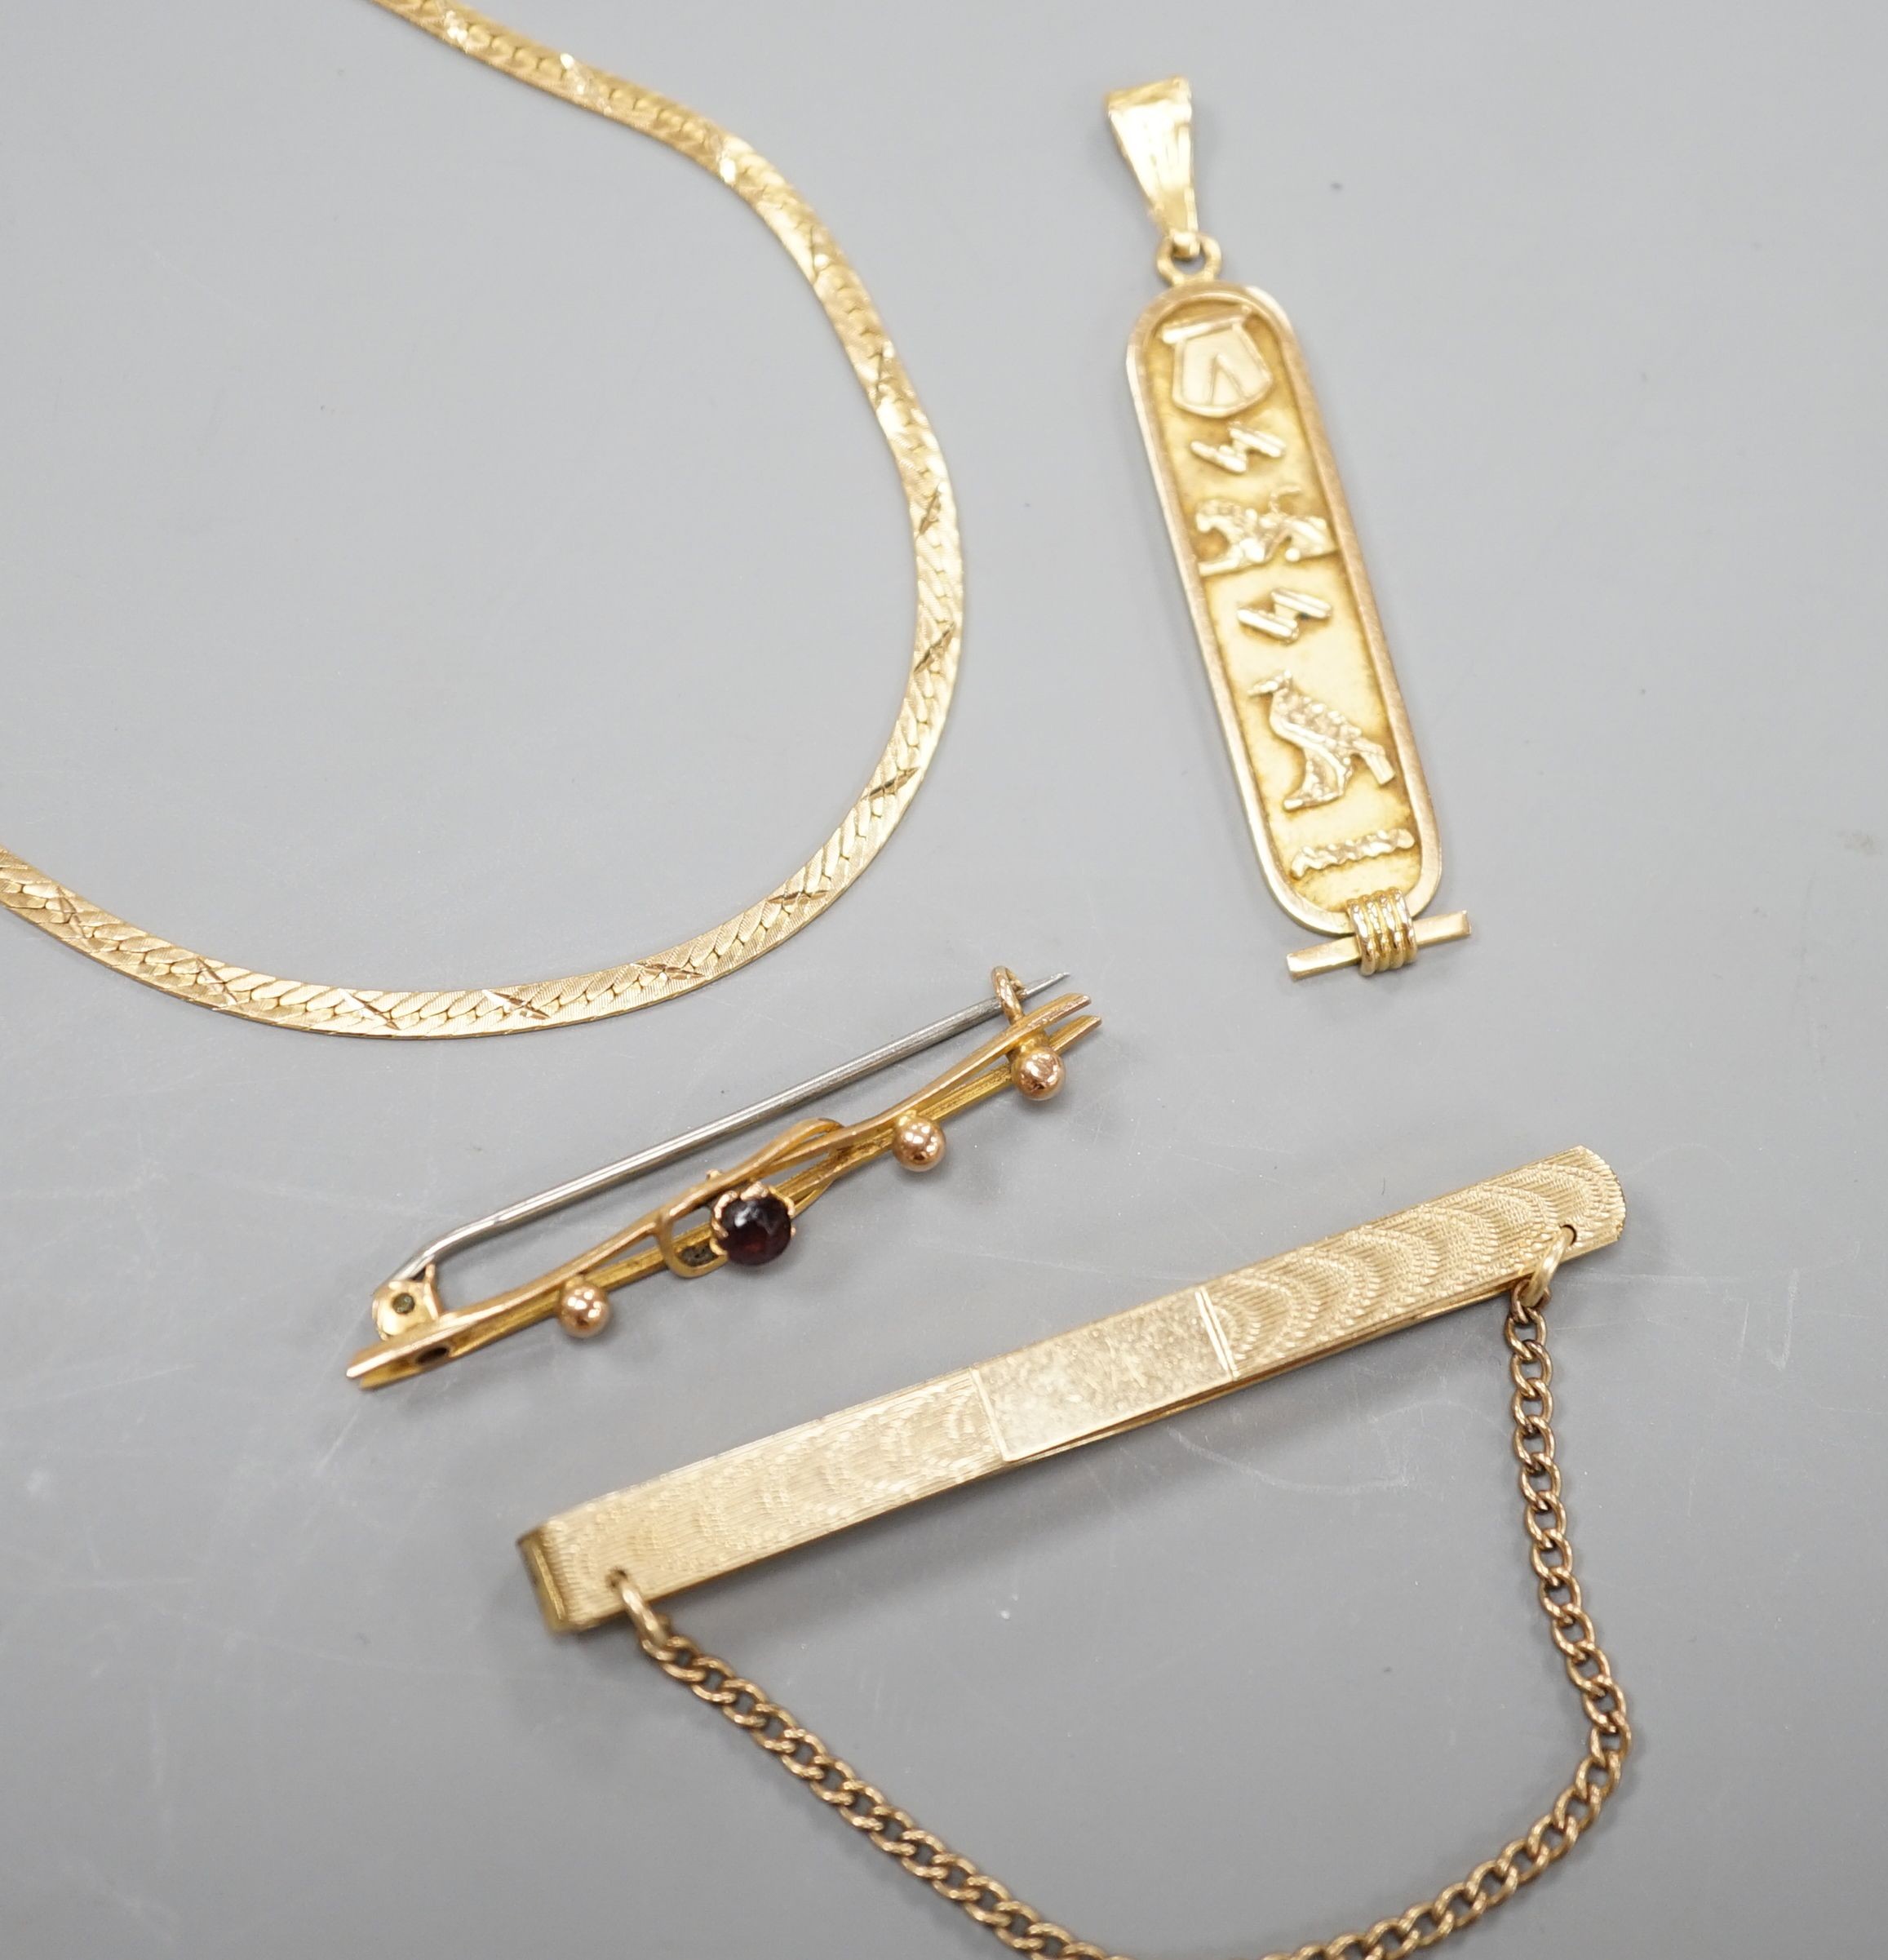 A Middle Eastern pendant and bracelet, gross 6.5 grams, together with a 9ct bar brooch and a rolled gold tie clip.